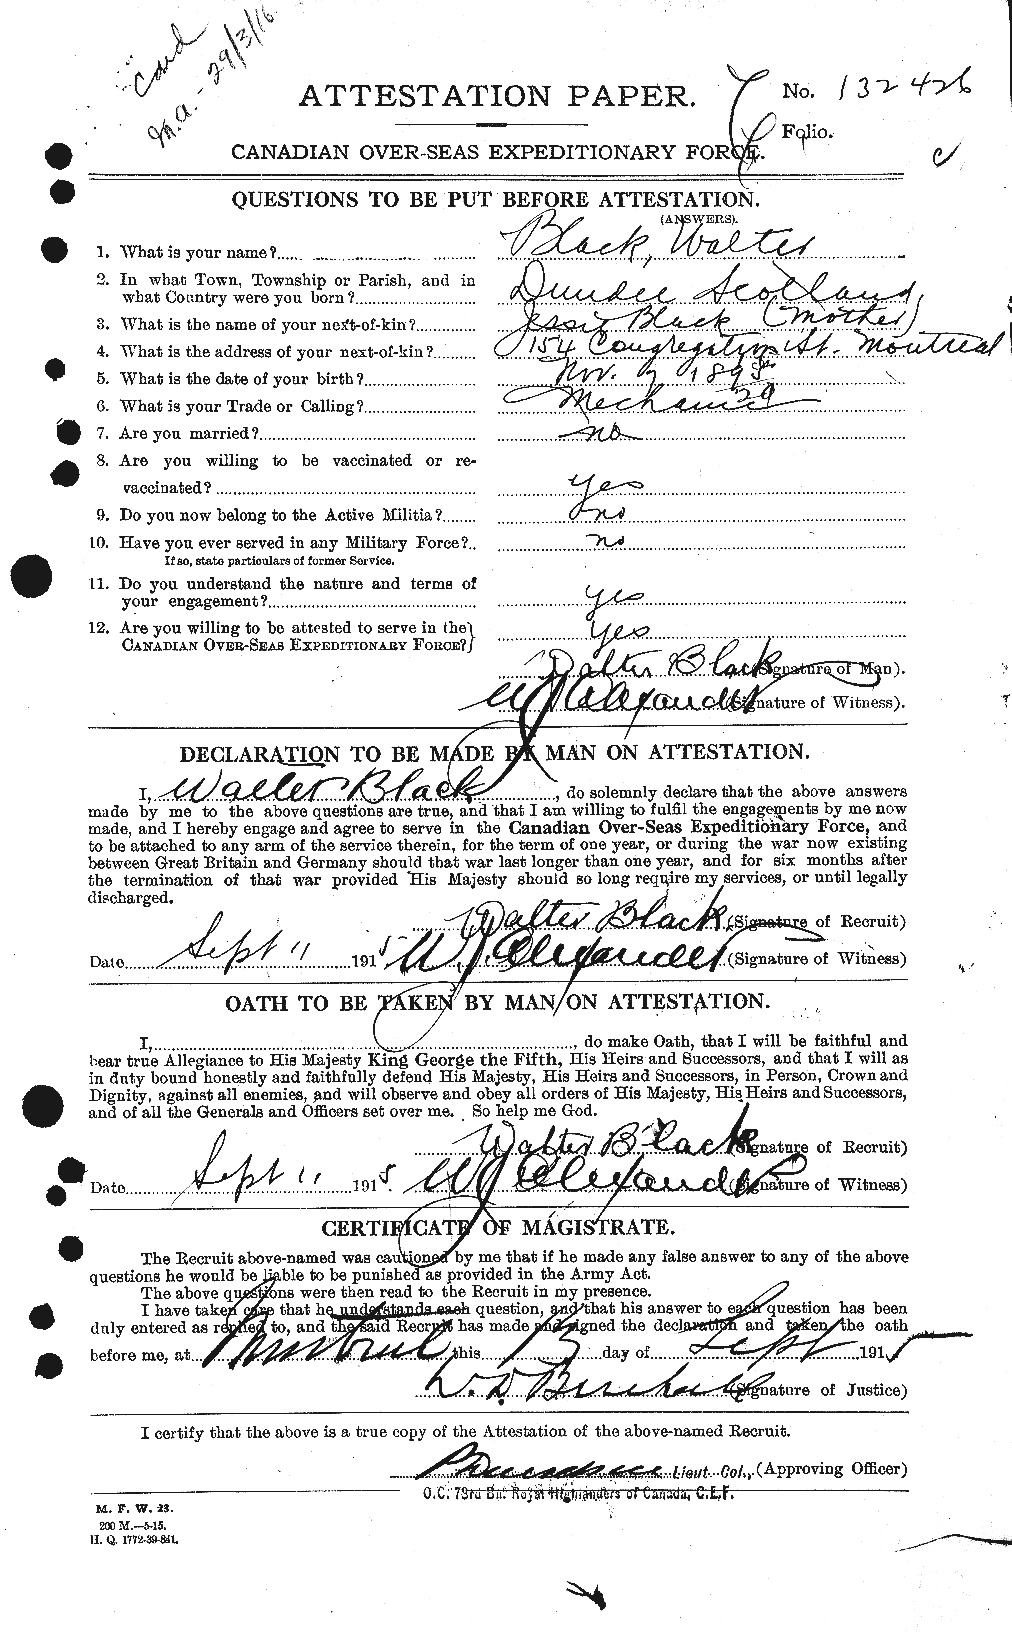 Personnel Records of the First World War - CEF 247642a